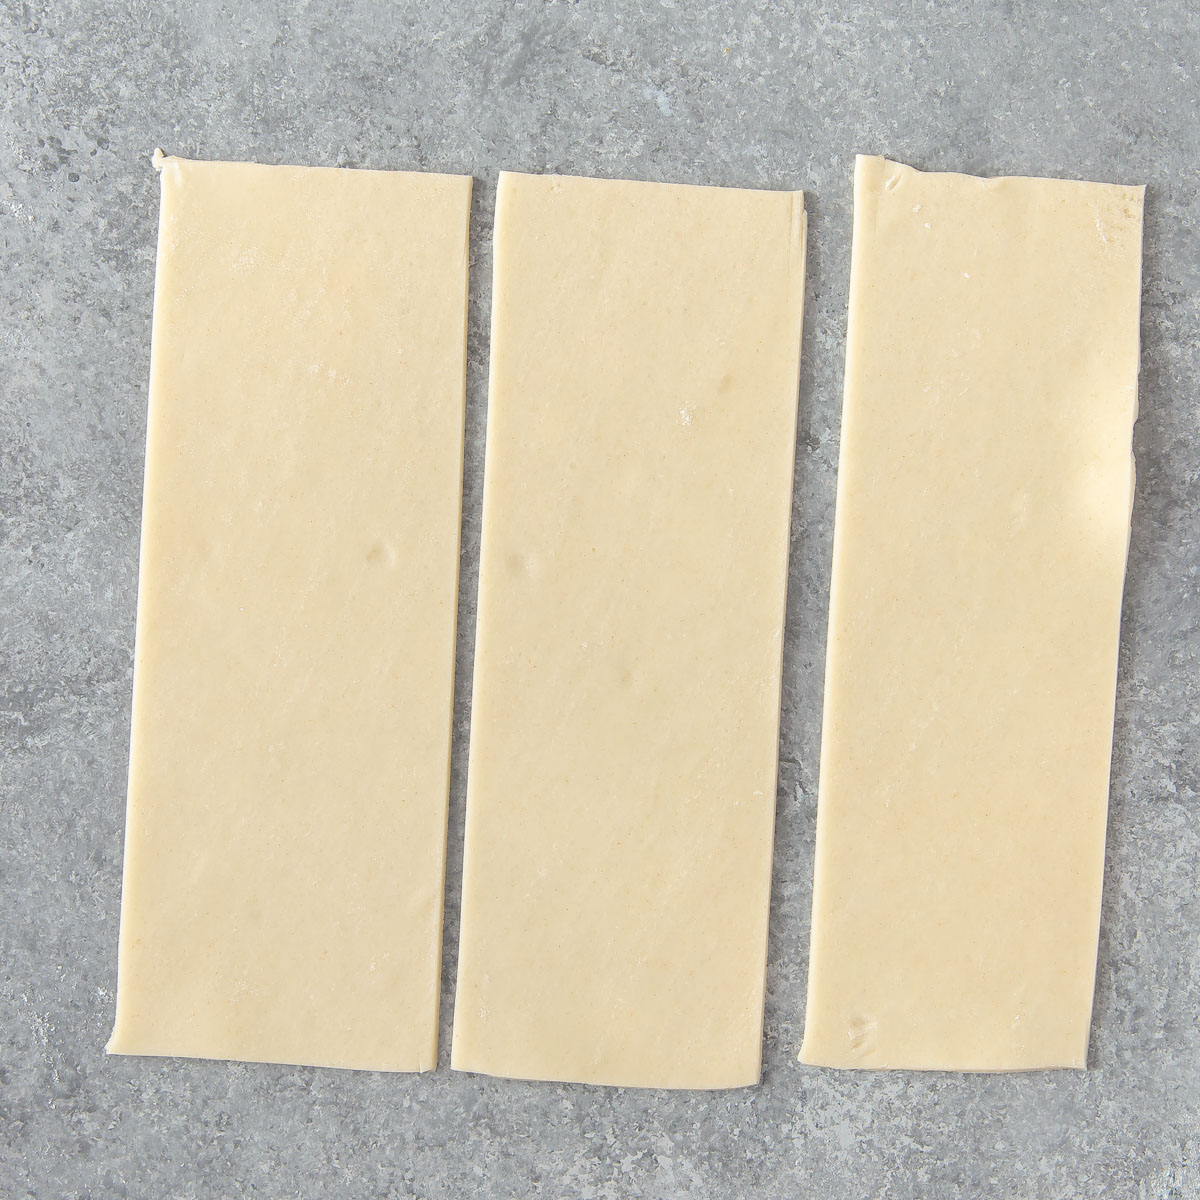 cutting a square piece of pie crust into 3 equal strips